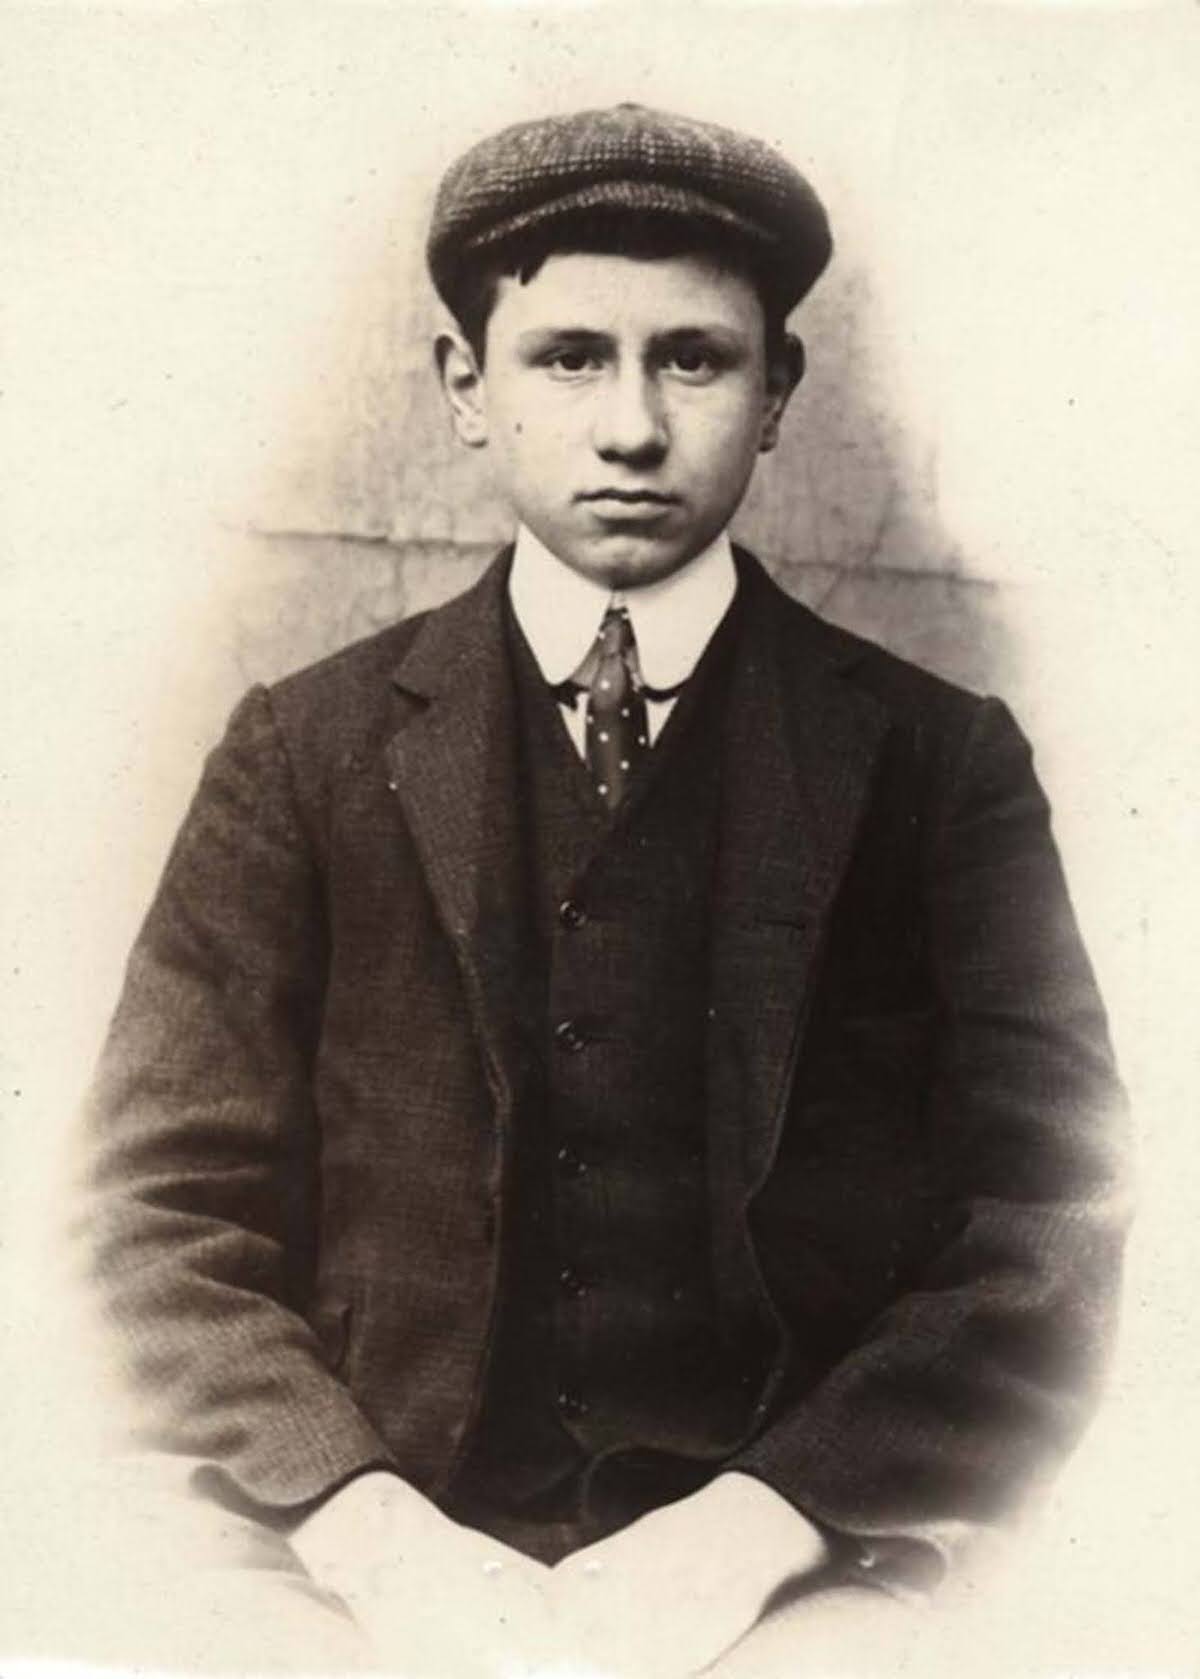 Percy John Proctor, 16, arrested for fraud, 1906.